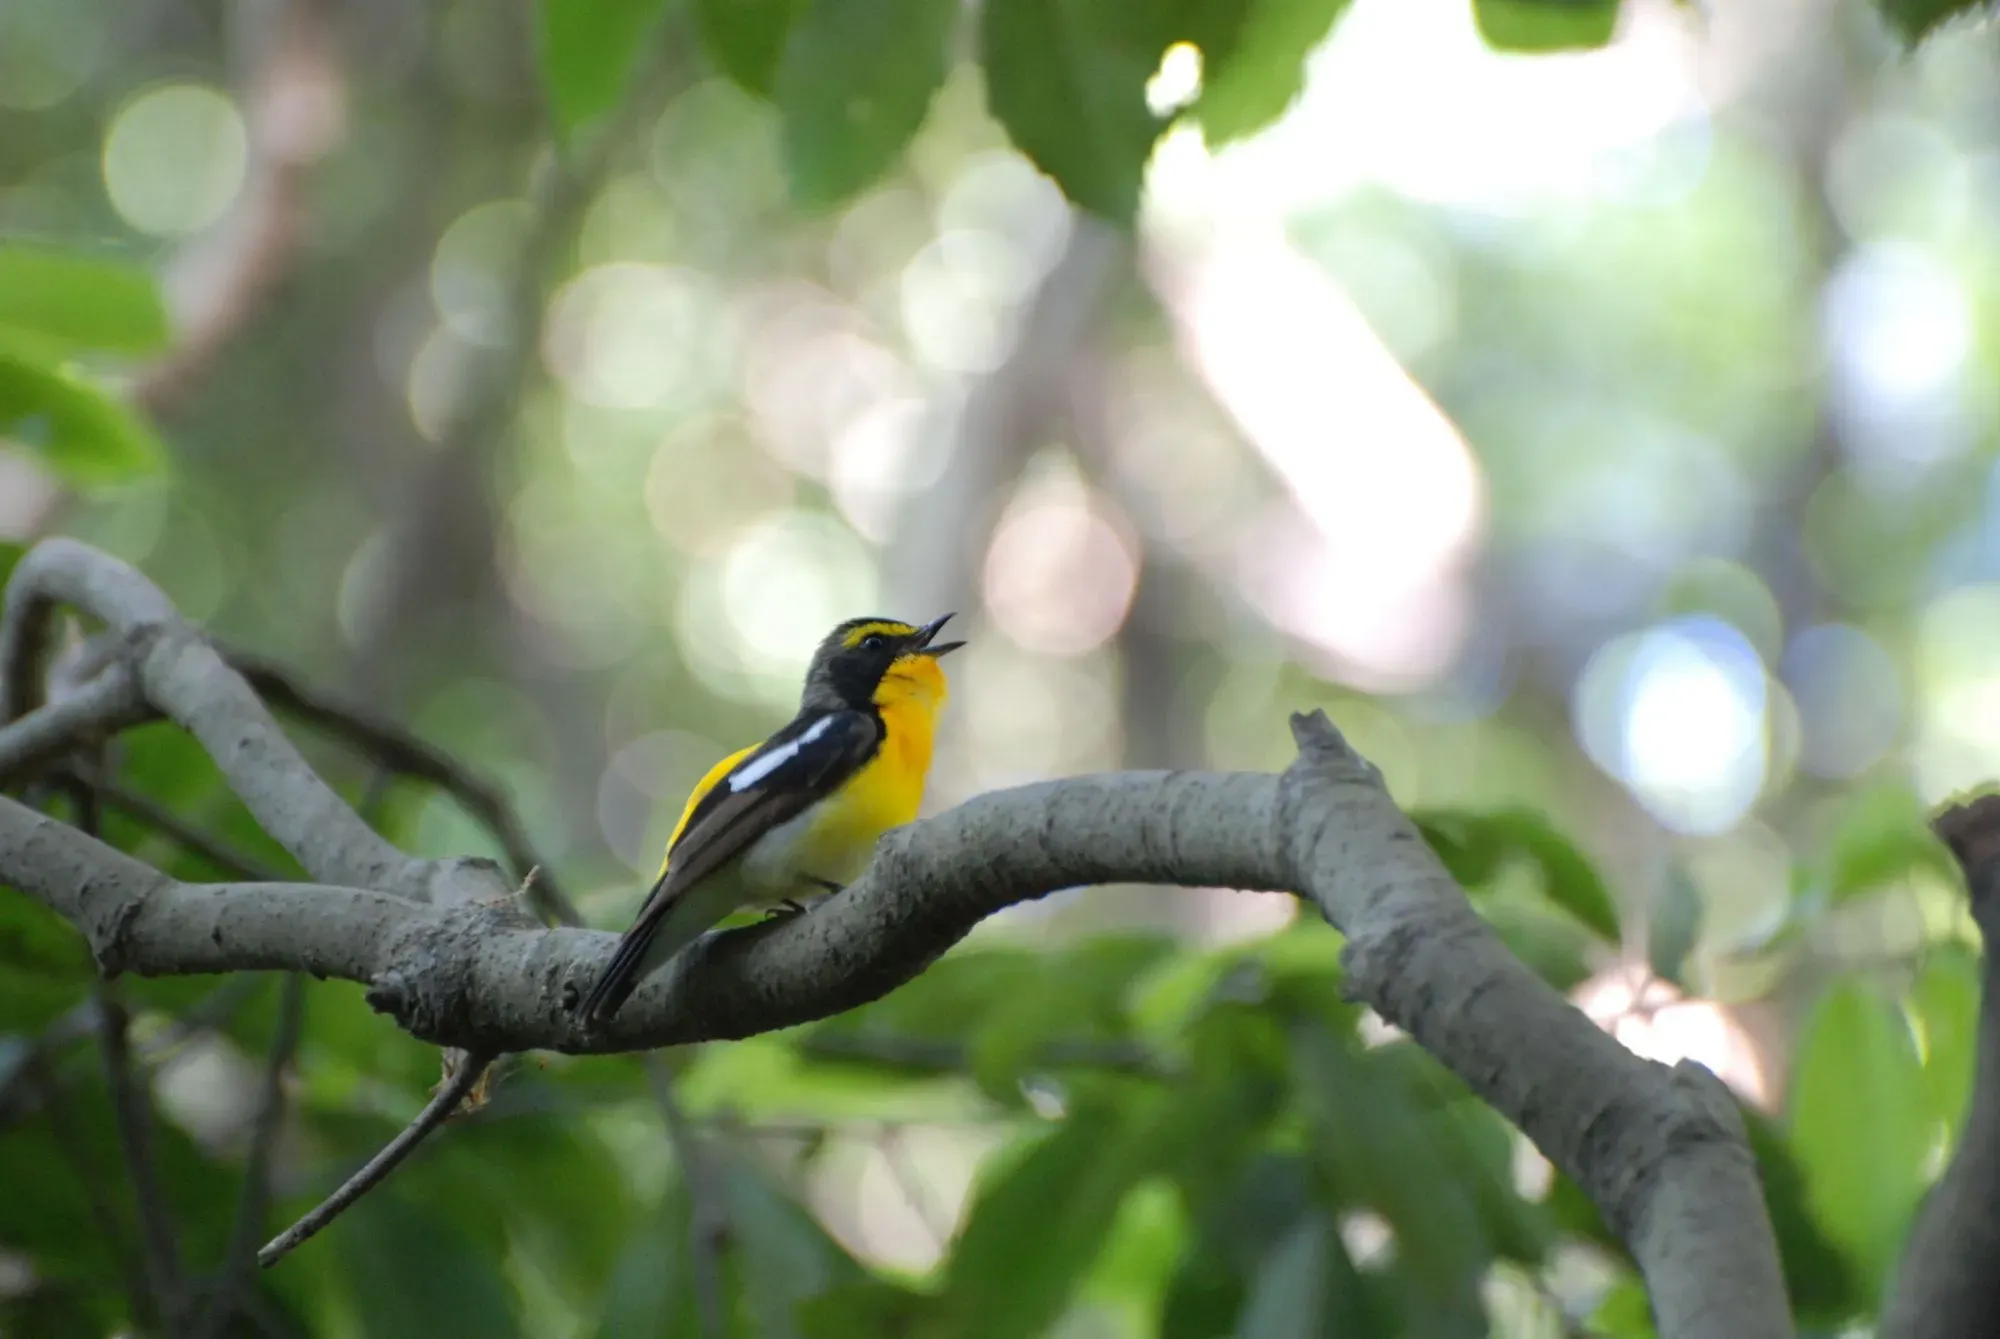 Fun facts about narcissus flycatcher birds are interesting!